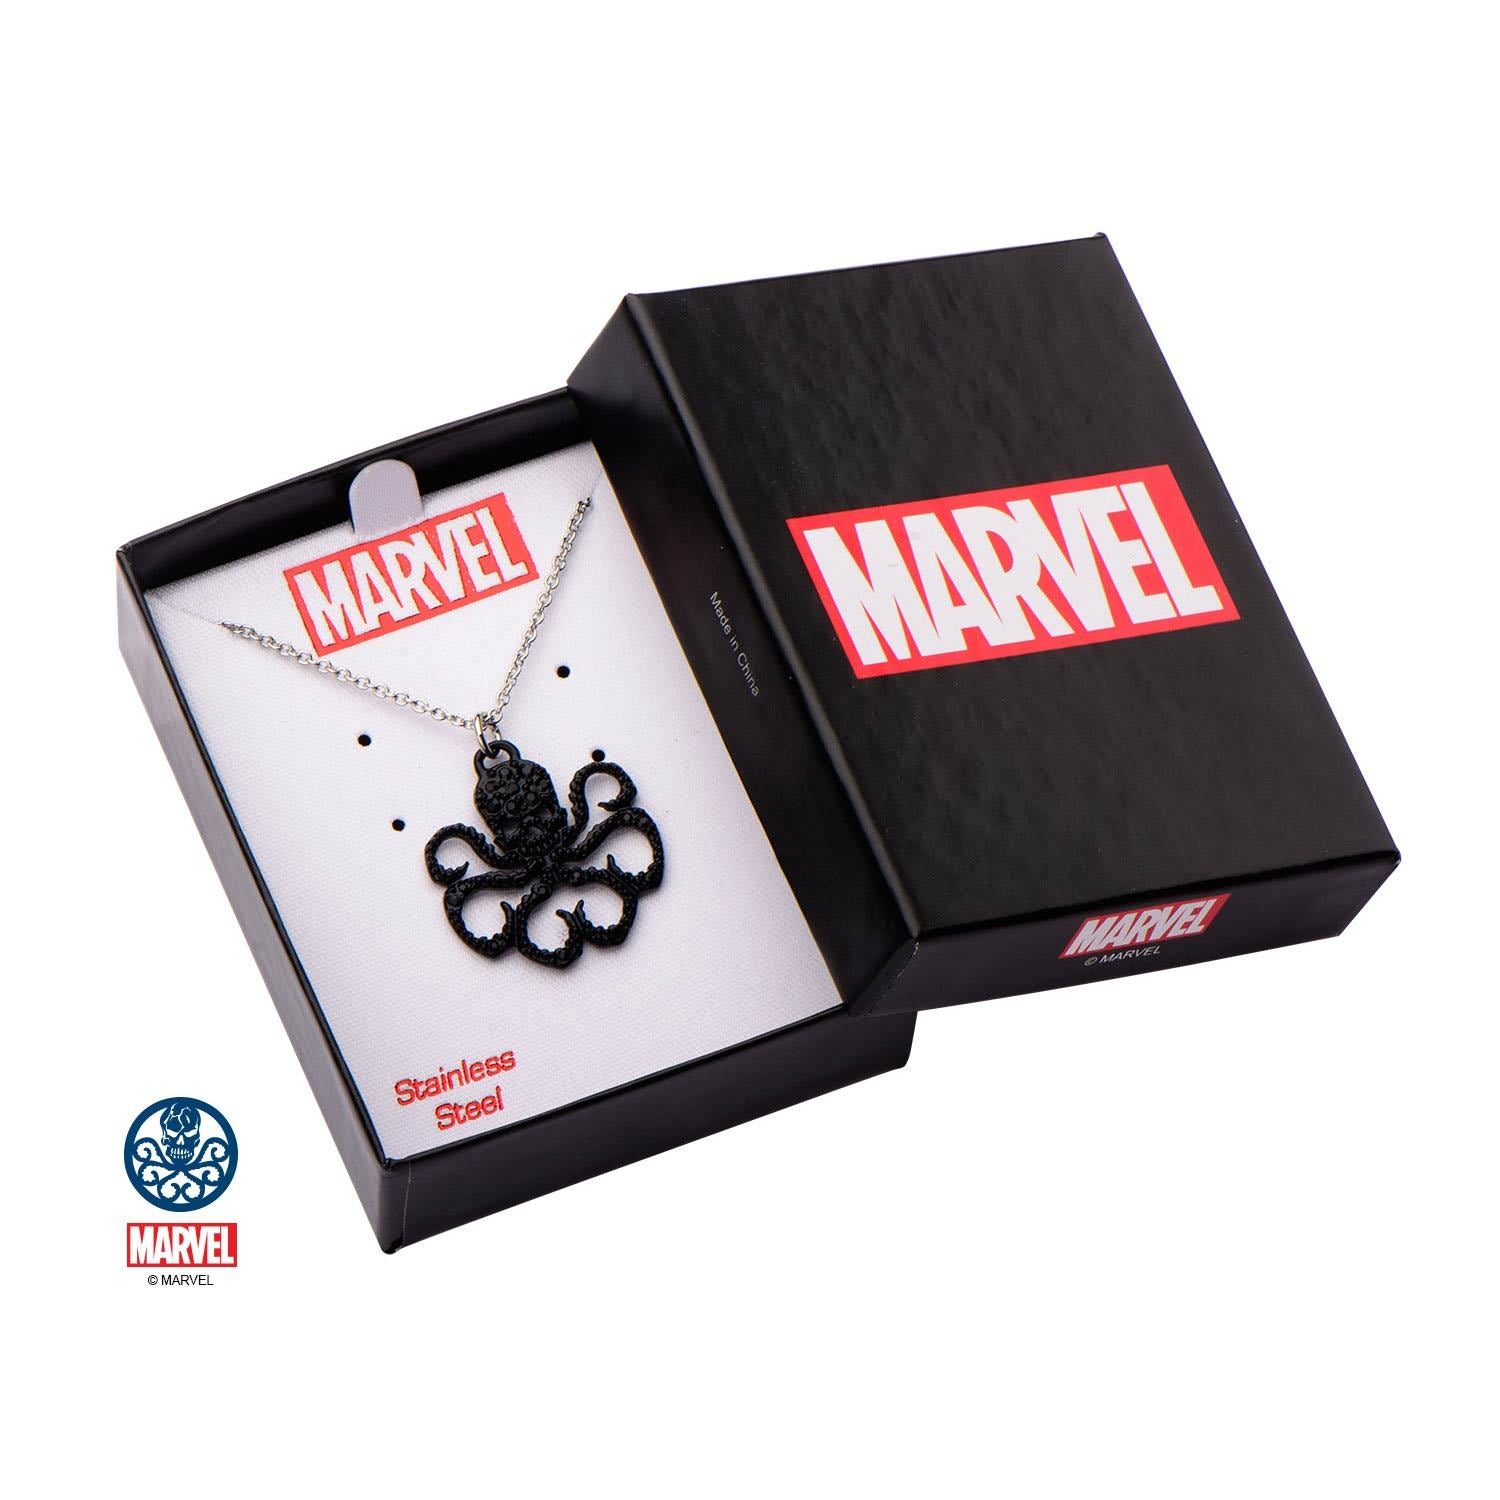 Marvel Cut Out Hydra with Black Gem Pendant Necklace [NOT AVAILABLE]